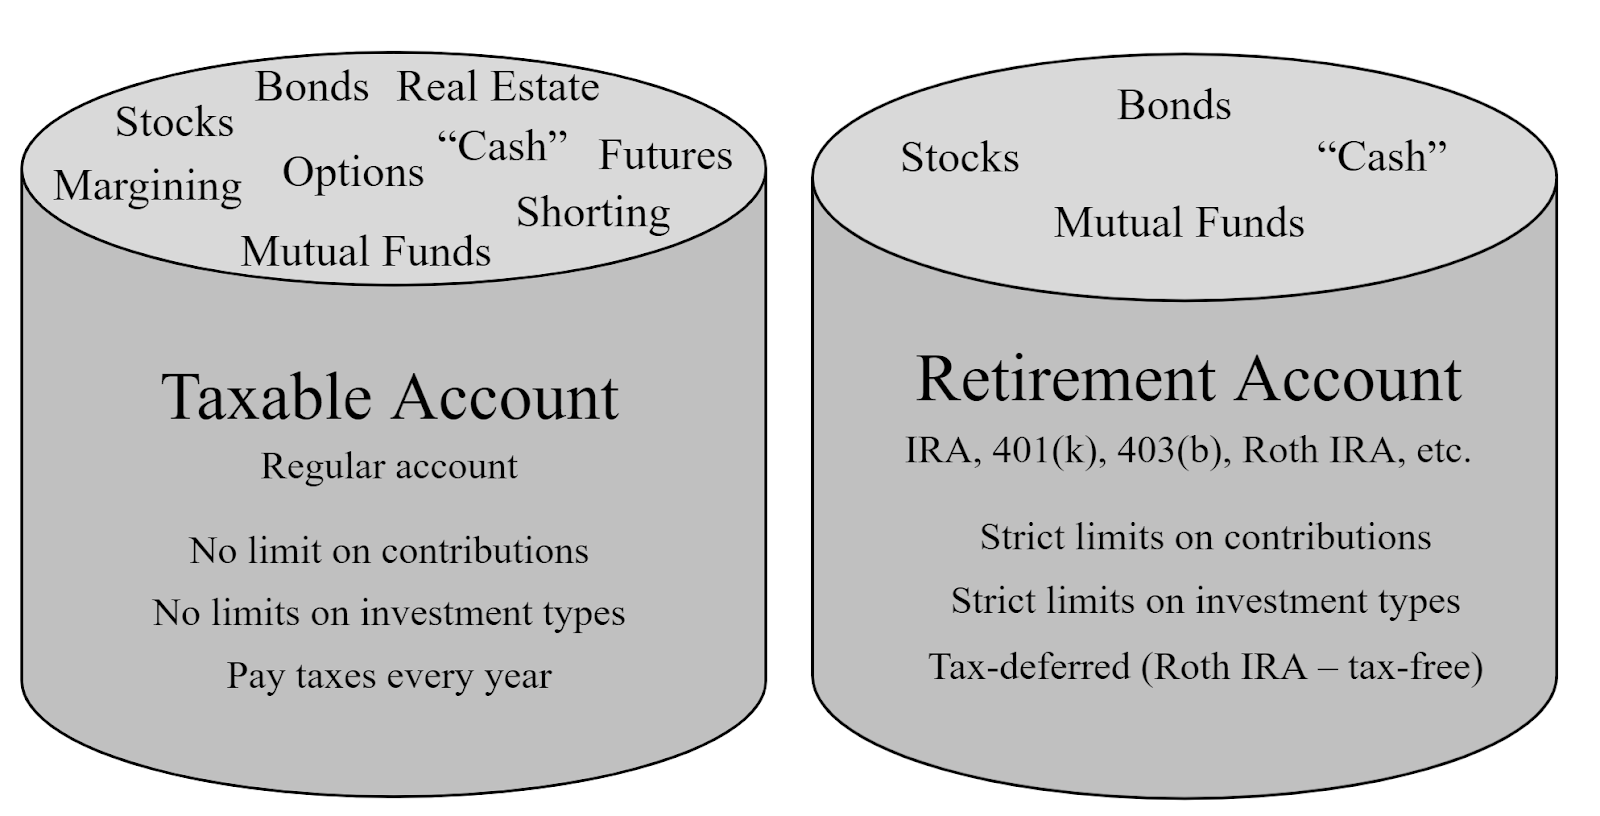 This graphic attempts to highlight the differences between regular taxable accounts and tax-qualified retirement accounts. Although there are many subtle and not-so-subtle differences, the major differences are how they are taxed by the IRS, how much money you can contribute, and what you can have in the account.